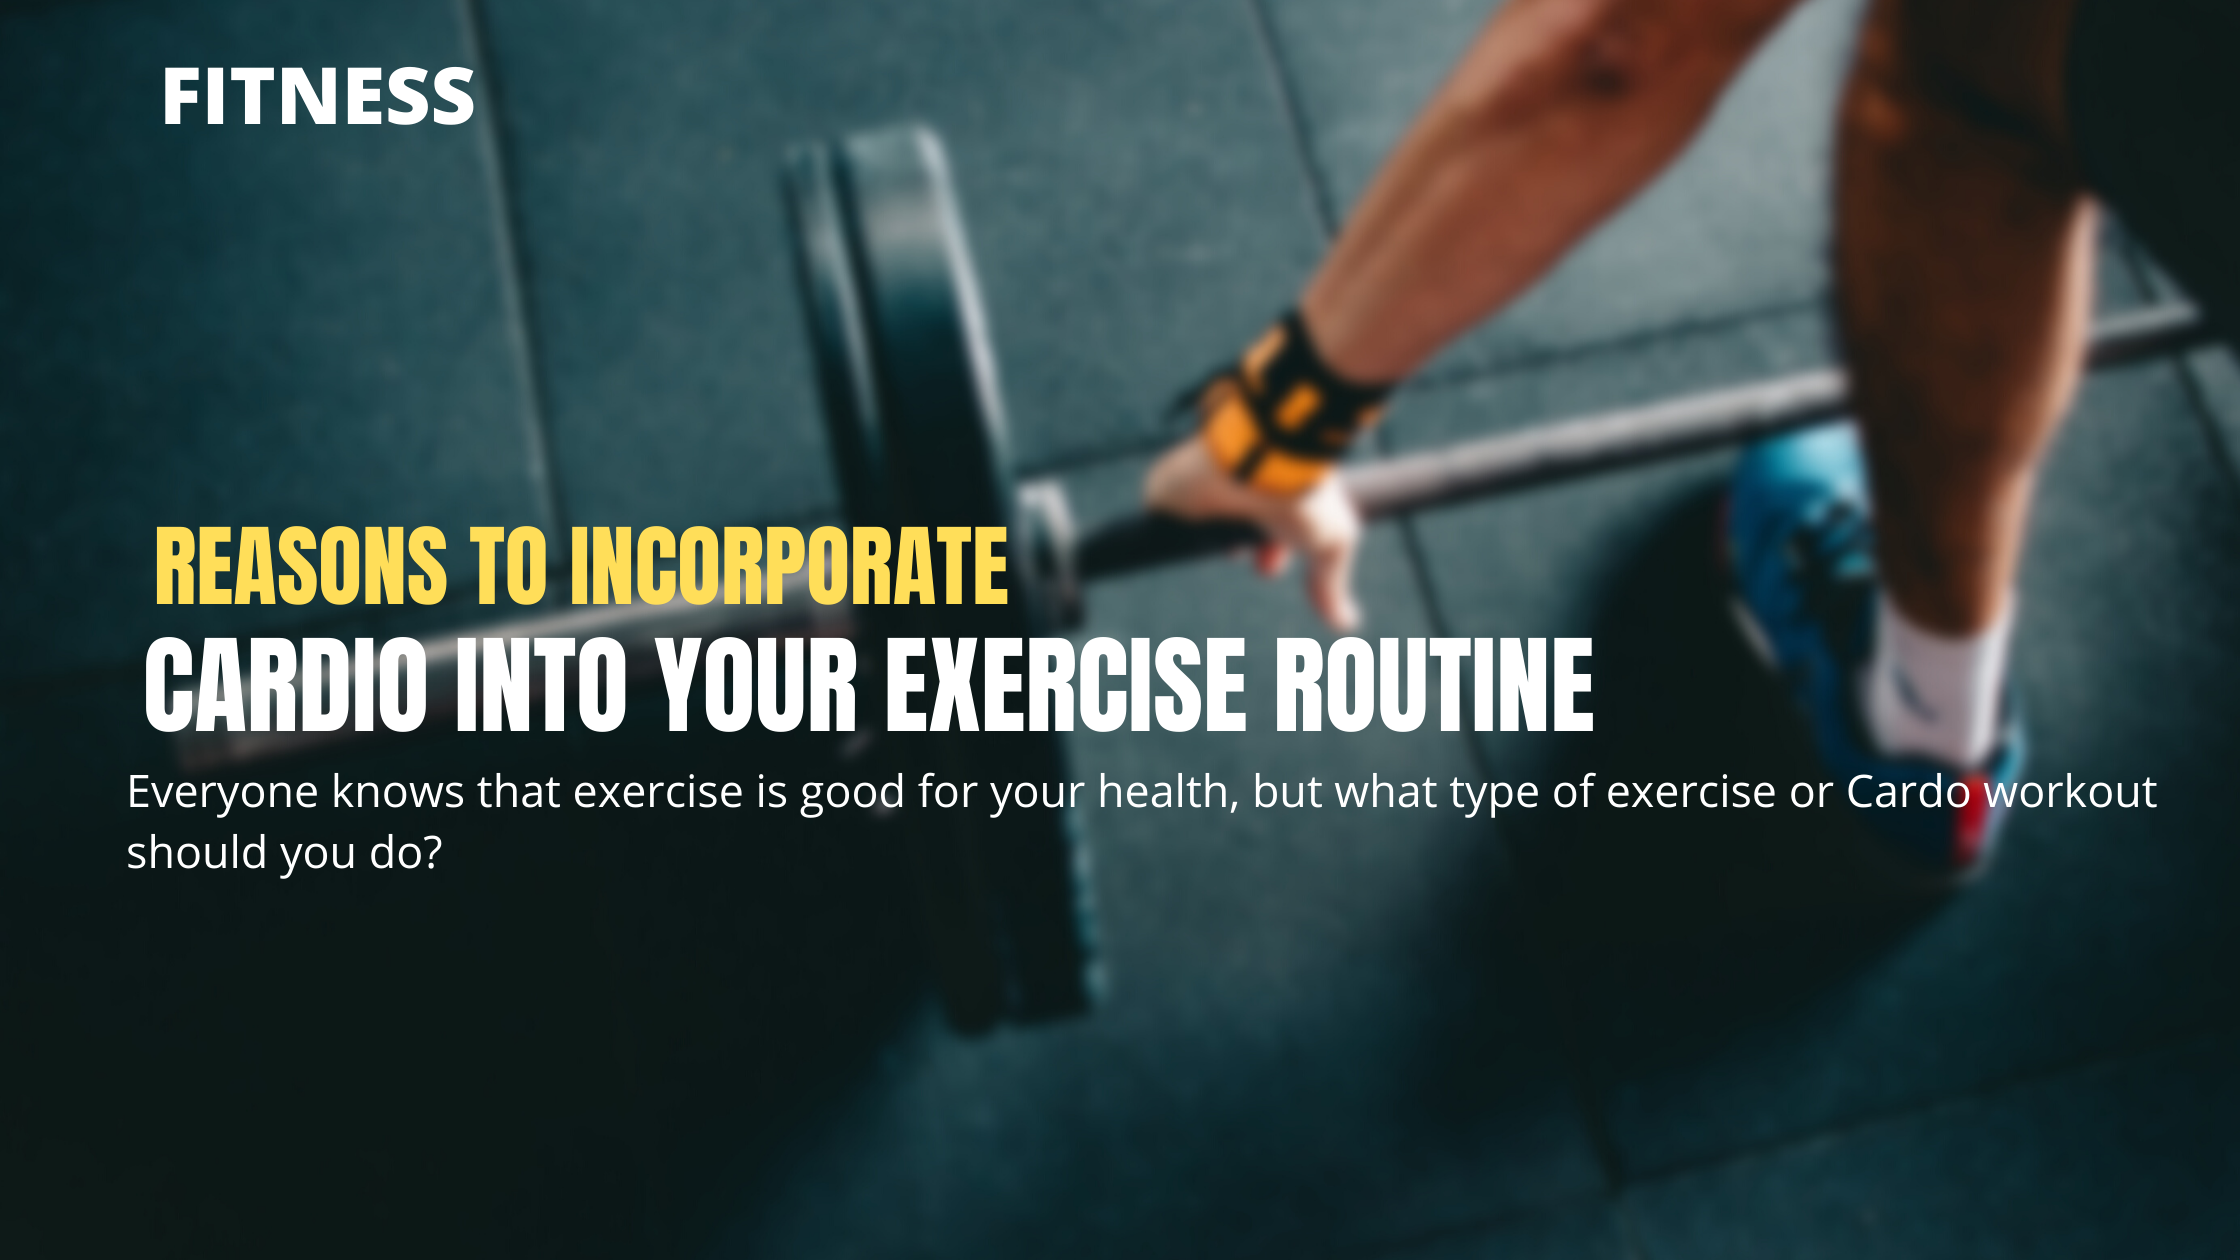 Reasons to Incorporate Cardio Into Your Exercise Routine